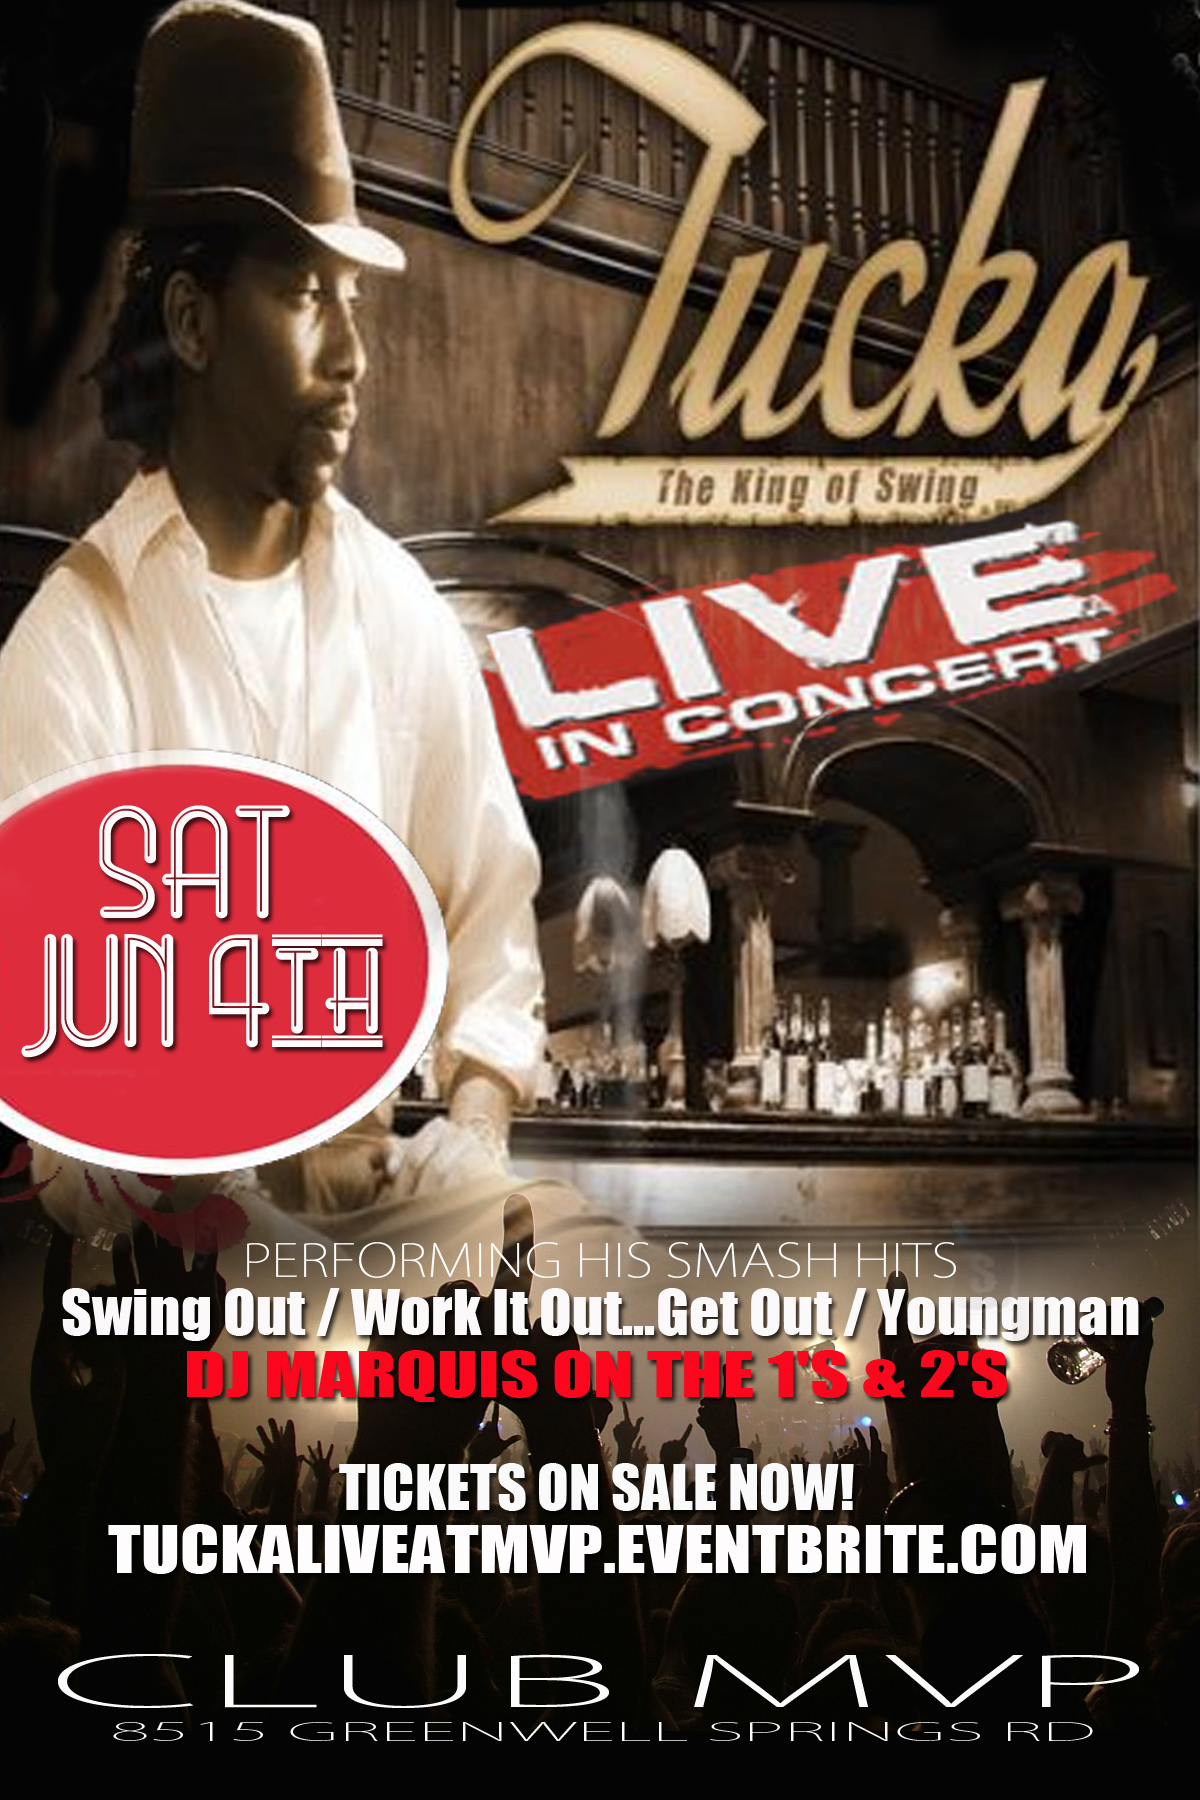 TUCKA "THE KING OF SWING" LIVE AT CLUB MVP Eventbrite